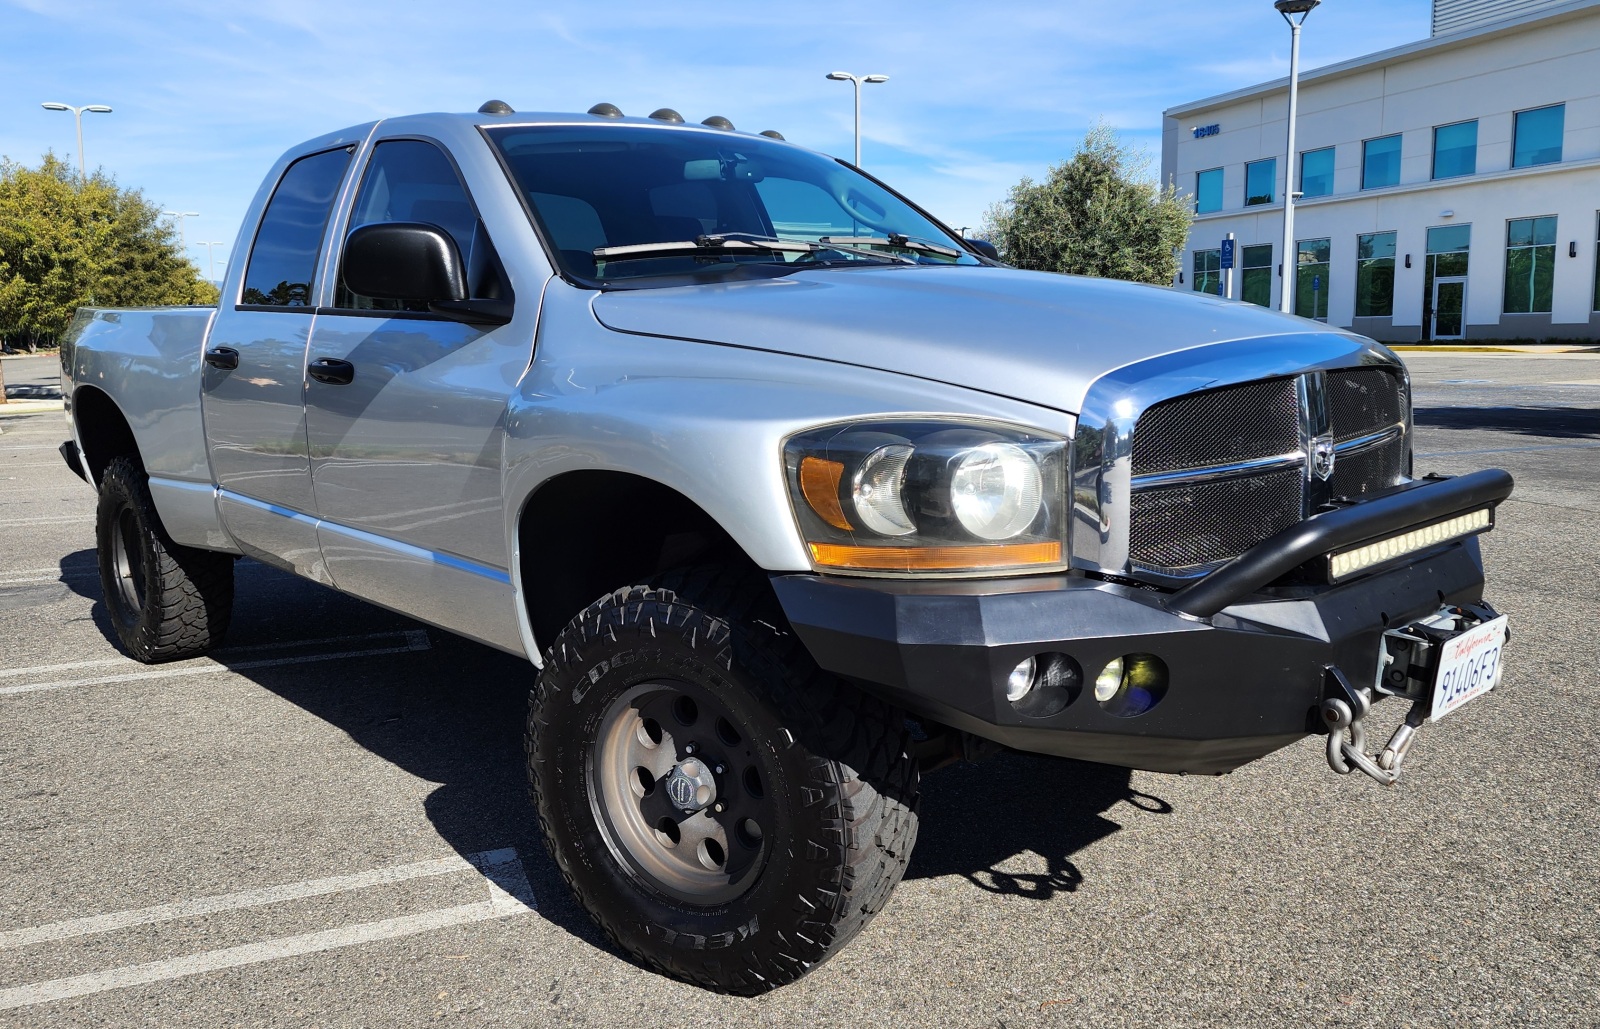 For Sale: *REDUCED* Clean 2006 Ram 1500 SLT 4x4 5.7L V8 | $20k+ UPGRADES | Well Maintained | Low Miles! - photo2